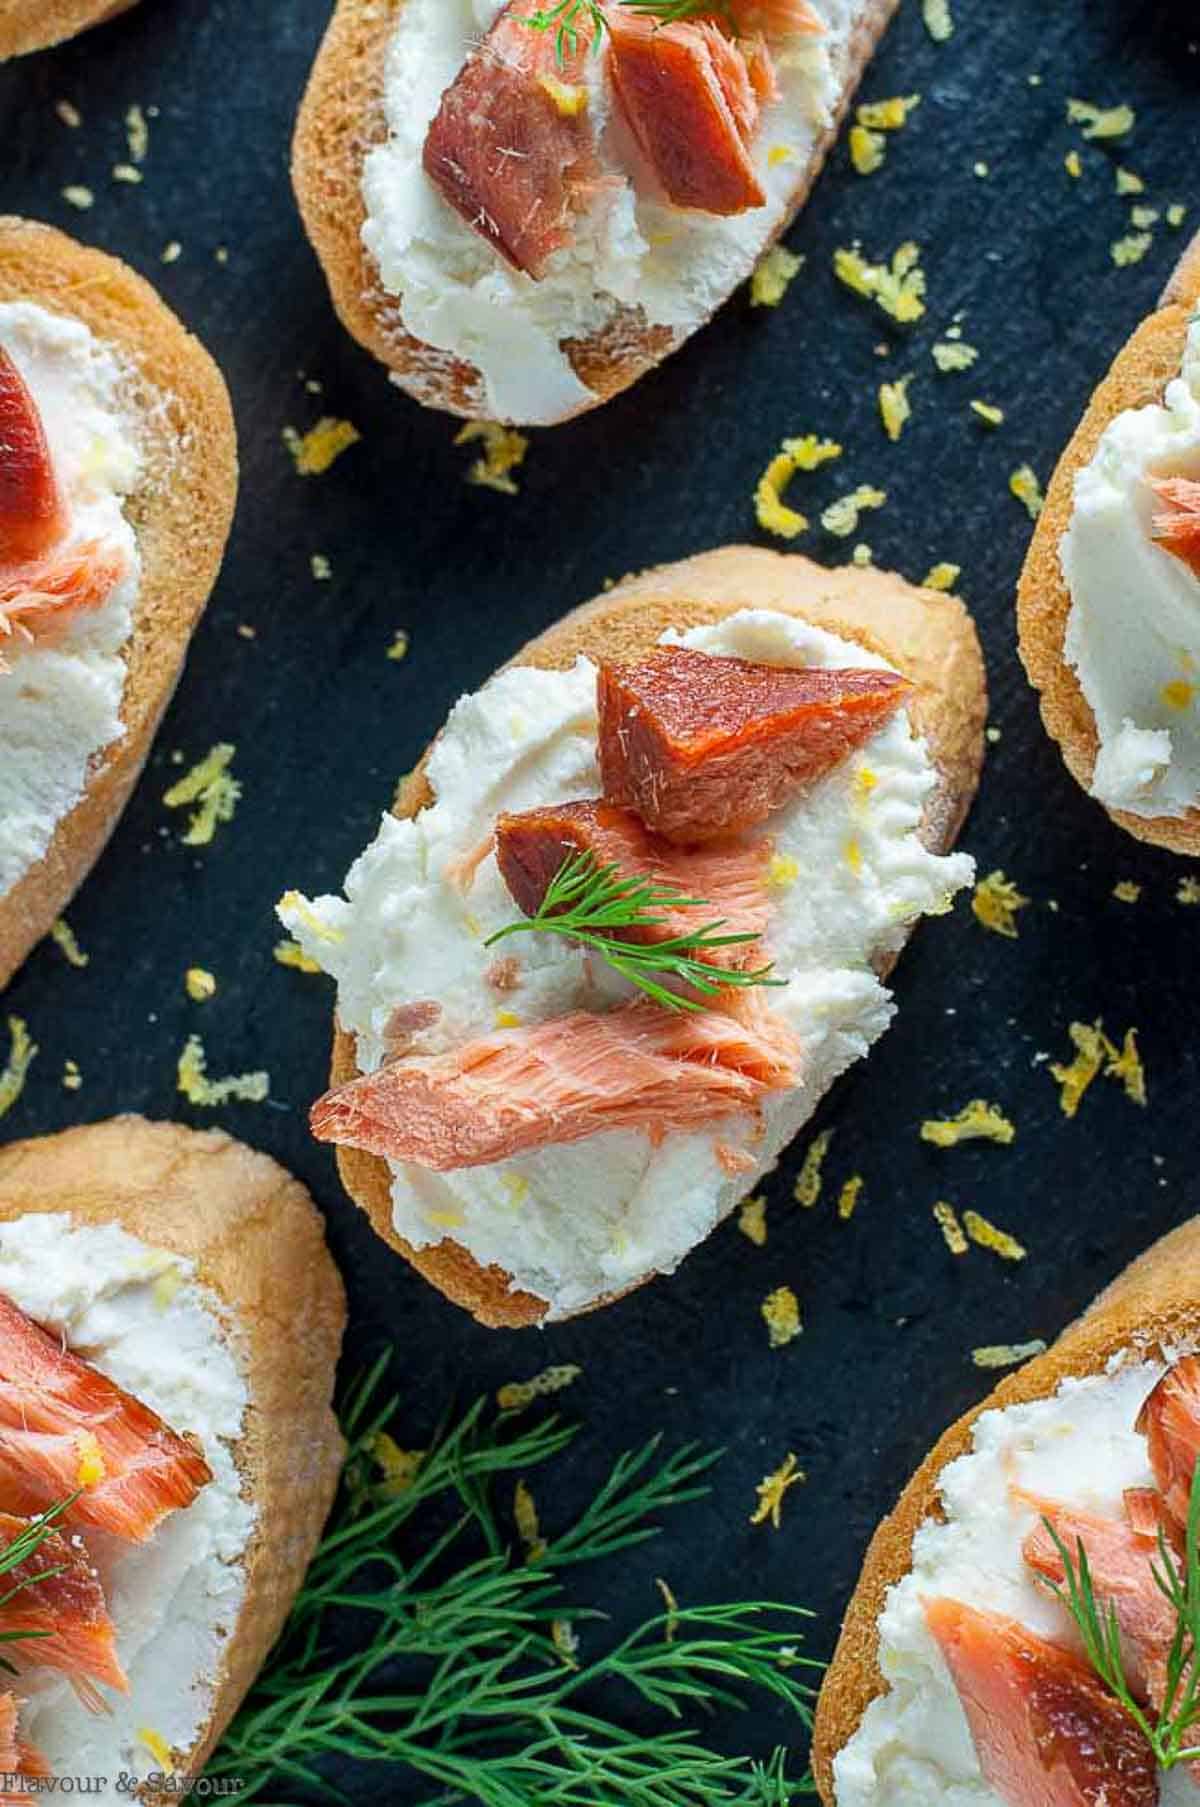 Smoked salmon crostini on gluten-free baguette slices sprinkled with lemon zest.